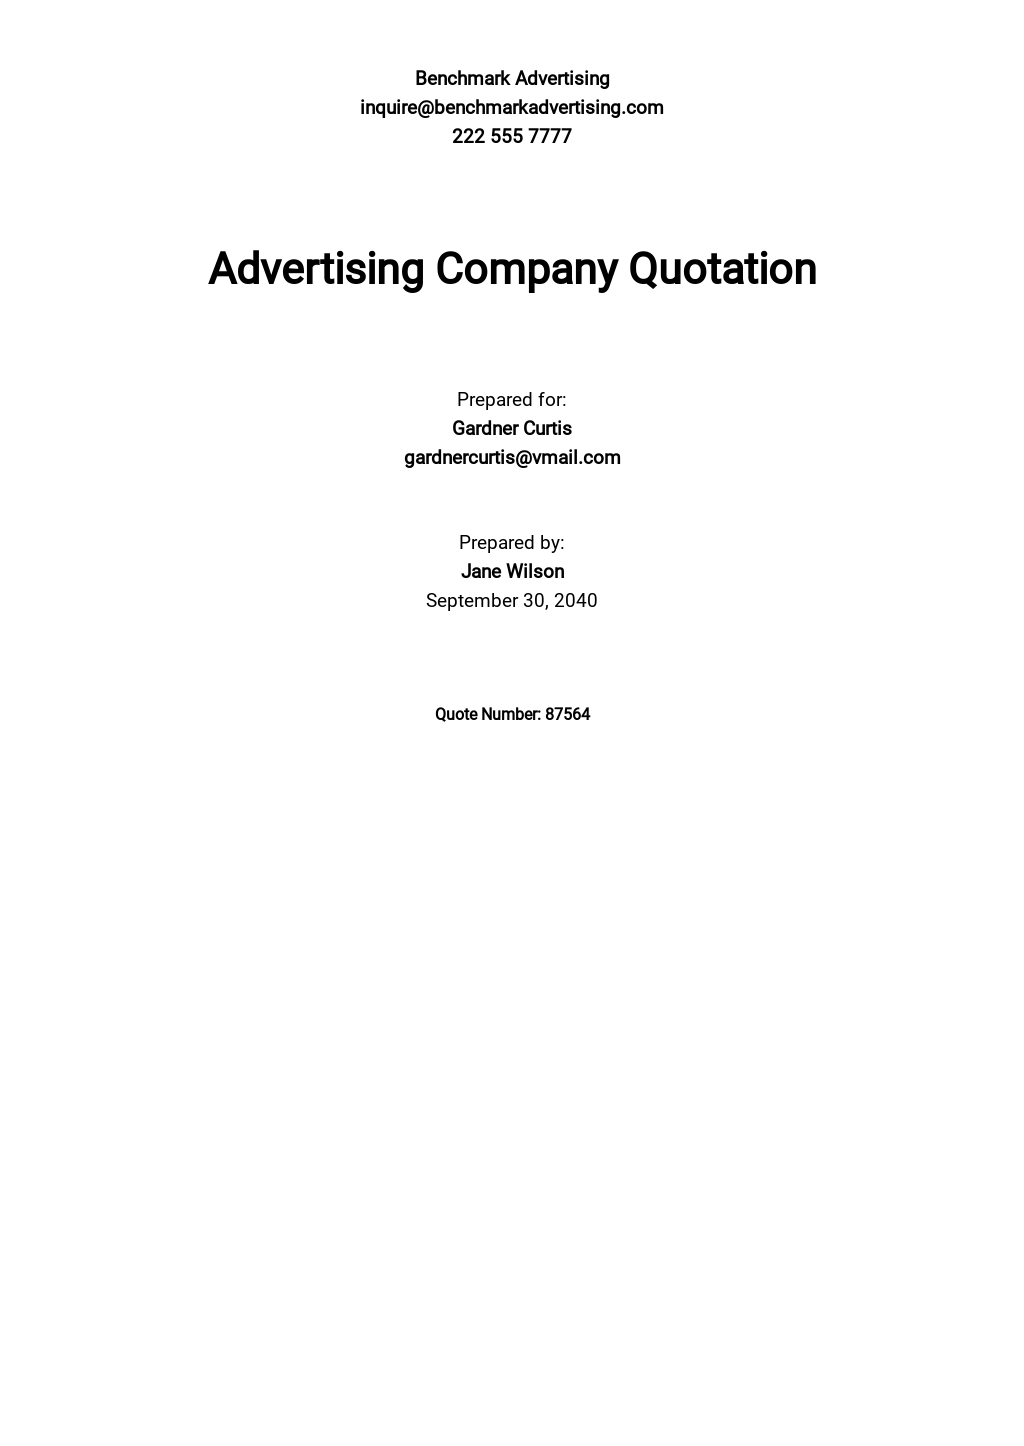 Advertising Company Quotation Template - Google Docs, Google Sheets, Excel, Word